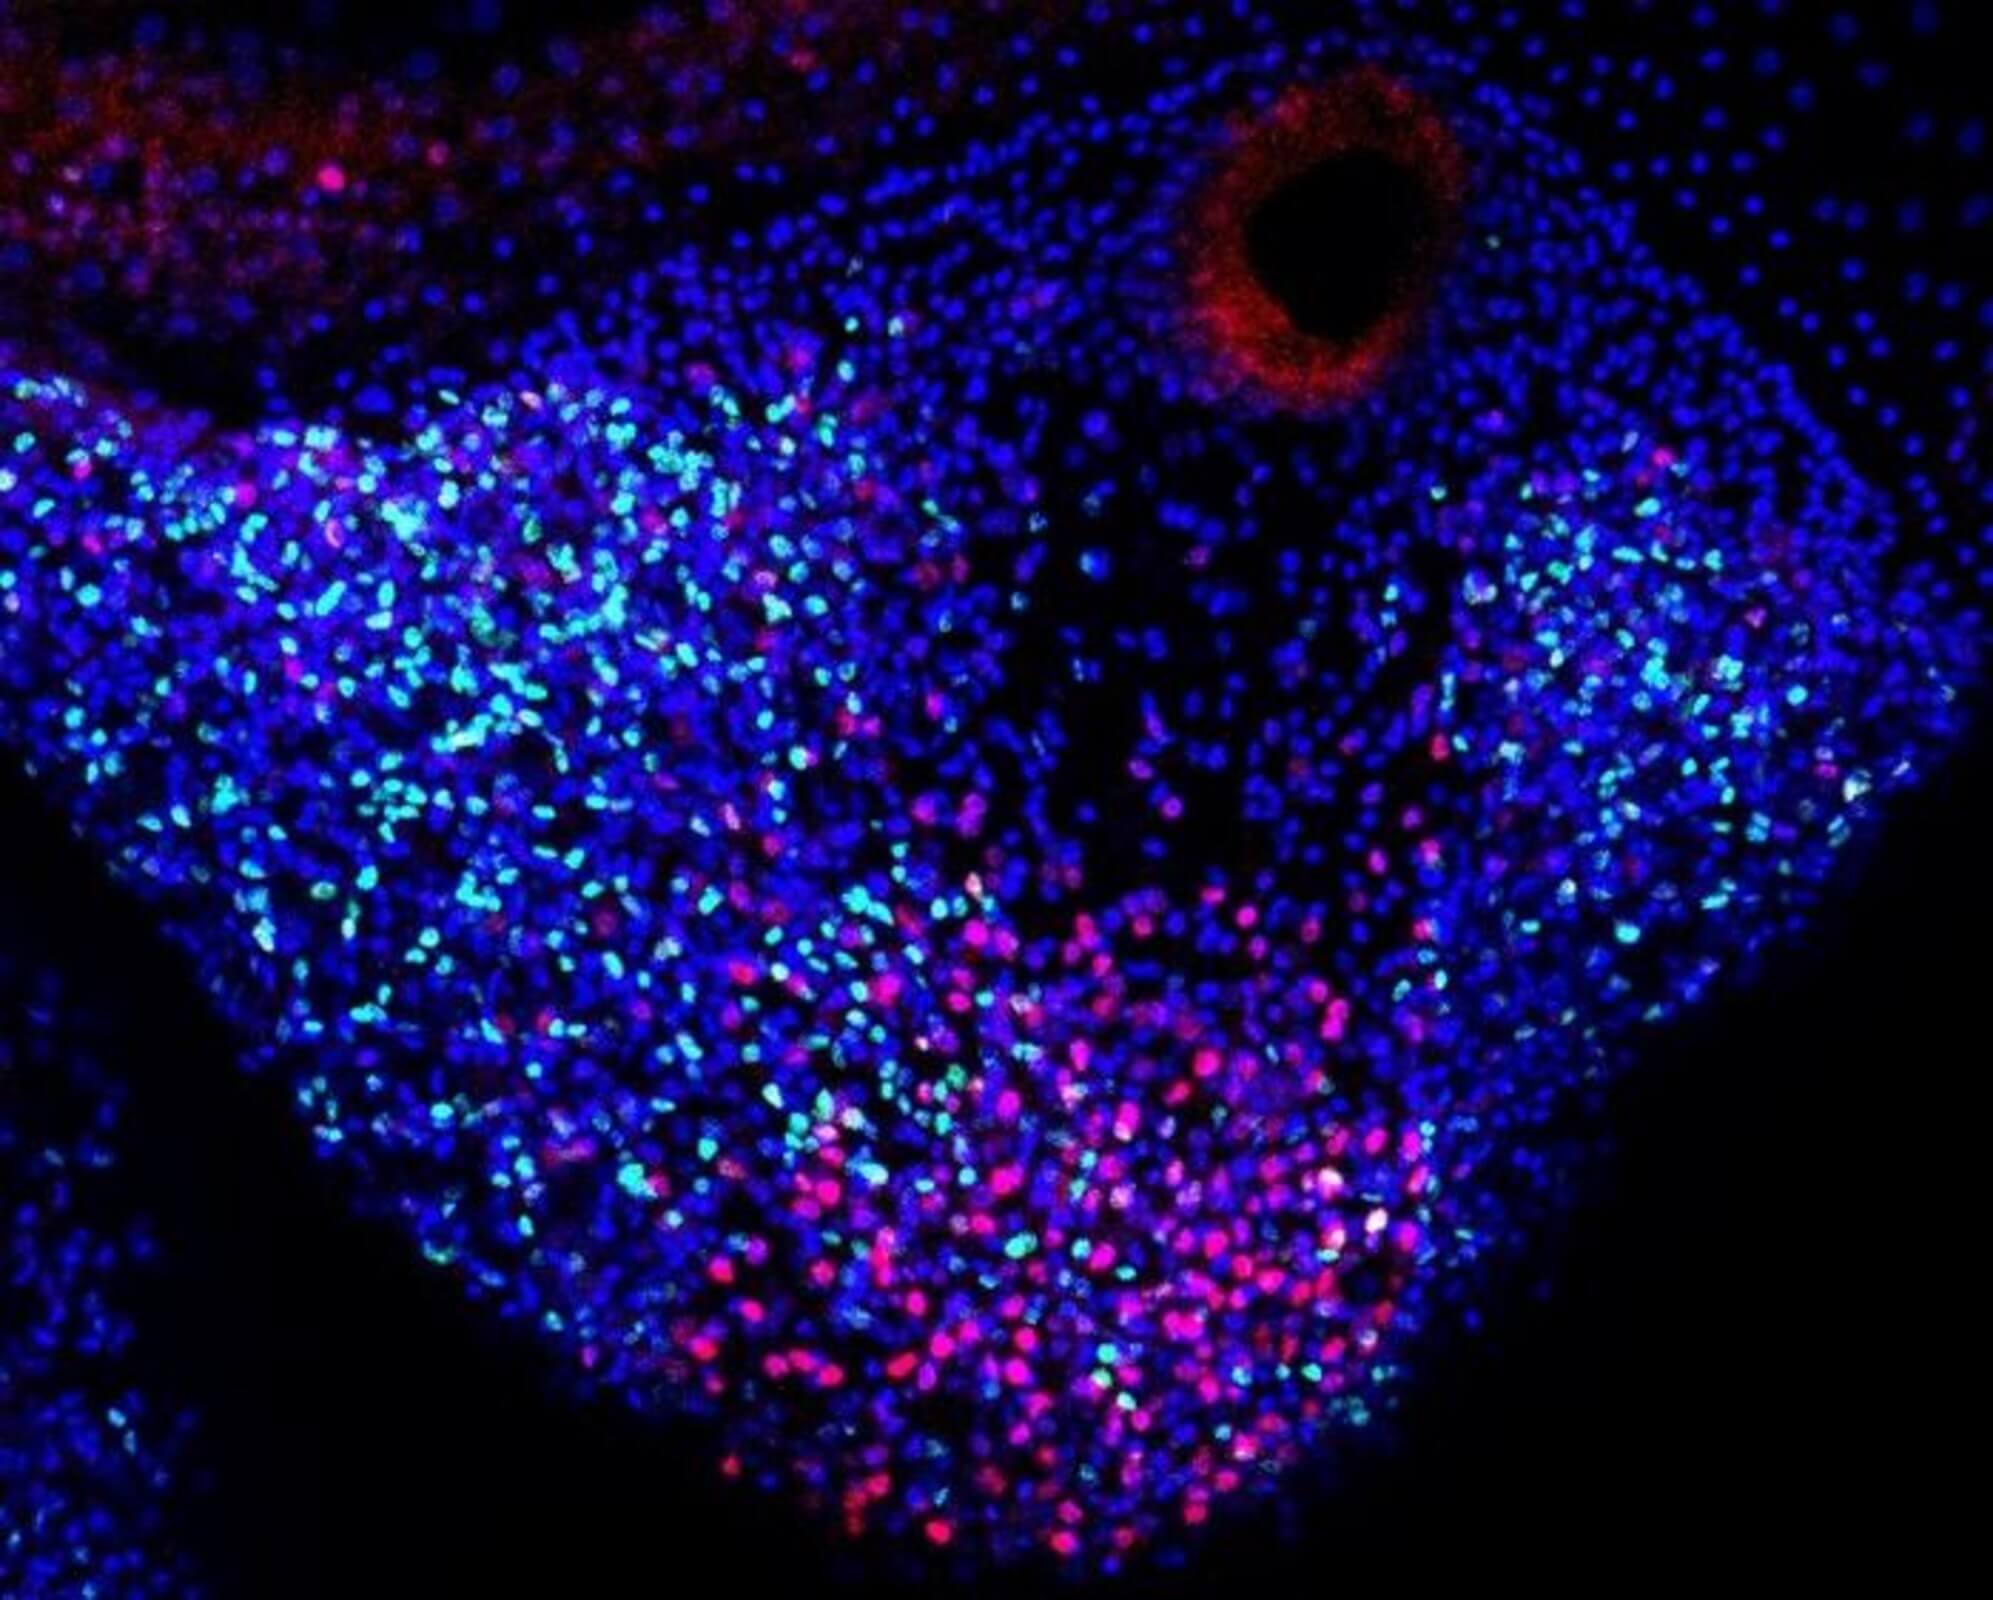 Resident stem cells (green) and repair-specific proliferative cells (red) contribute to tentacle regeneration in Cladonema